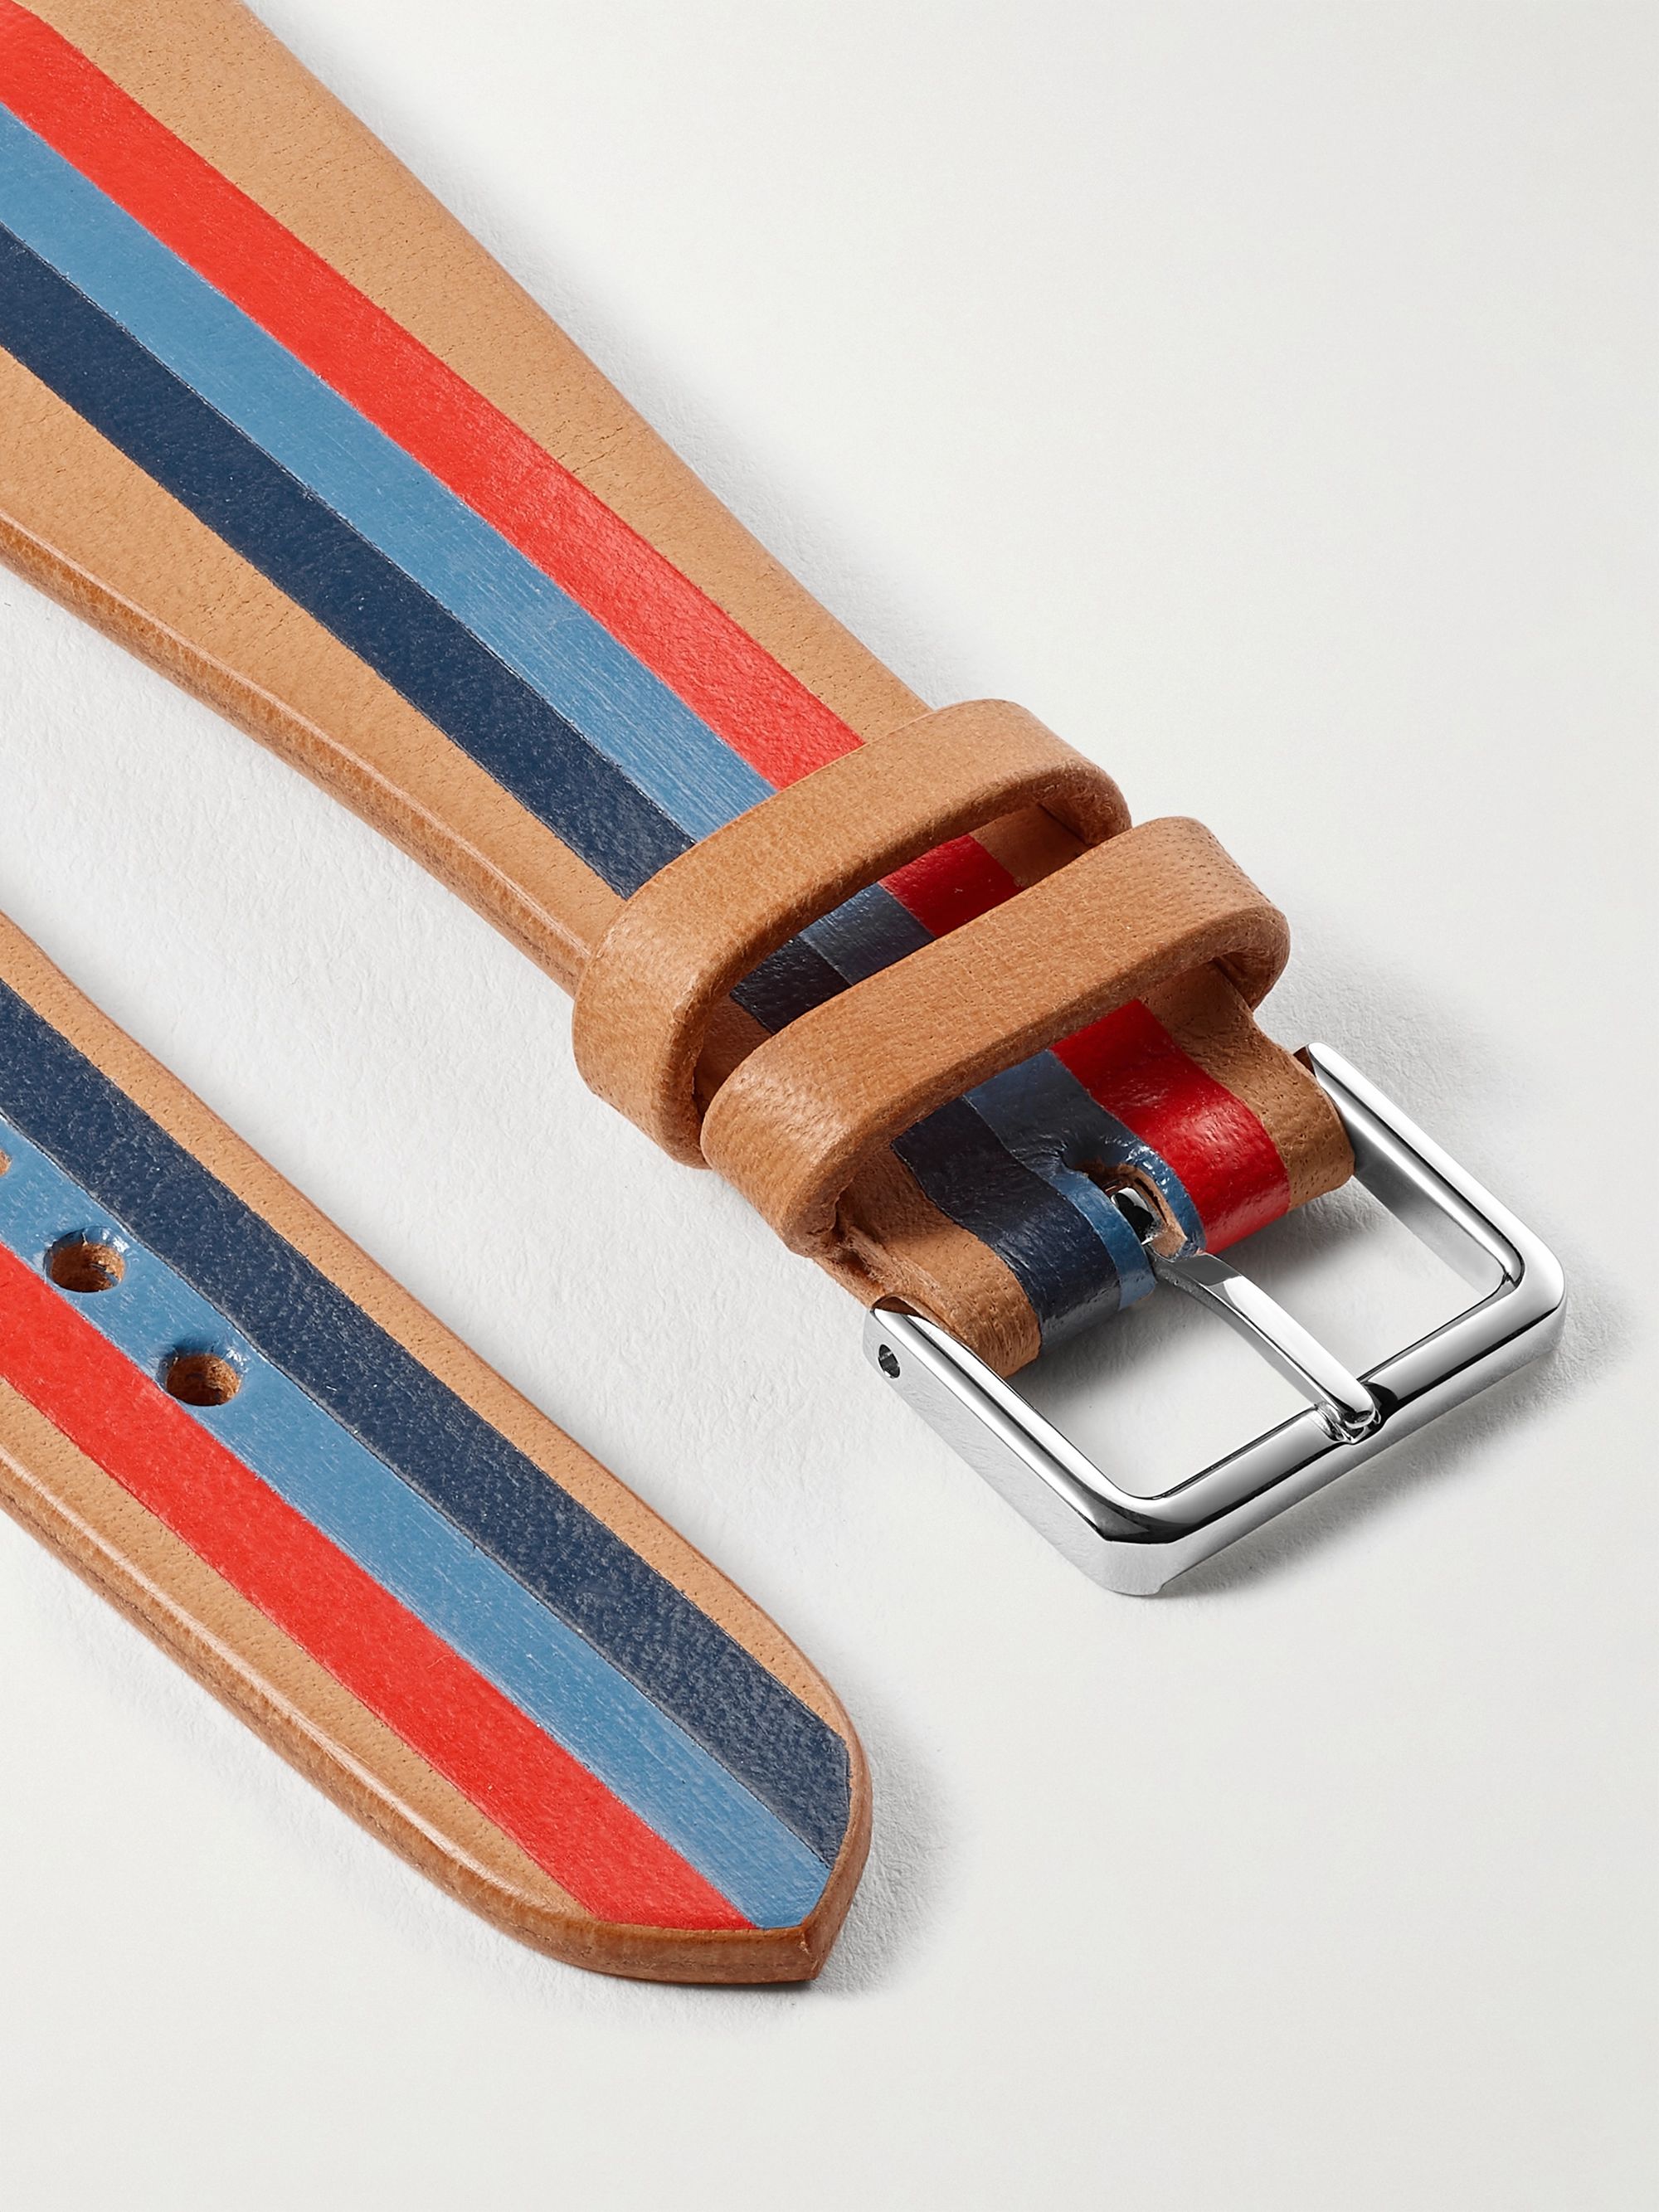 Straps navy blue stripes and burgundy leather finishes